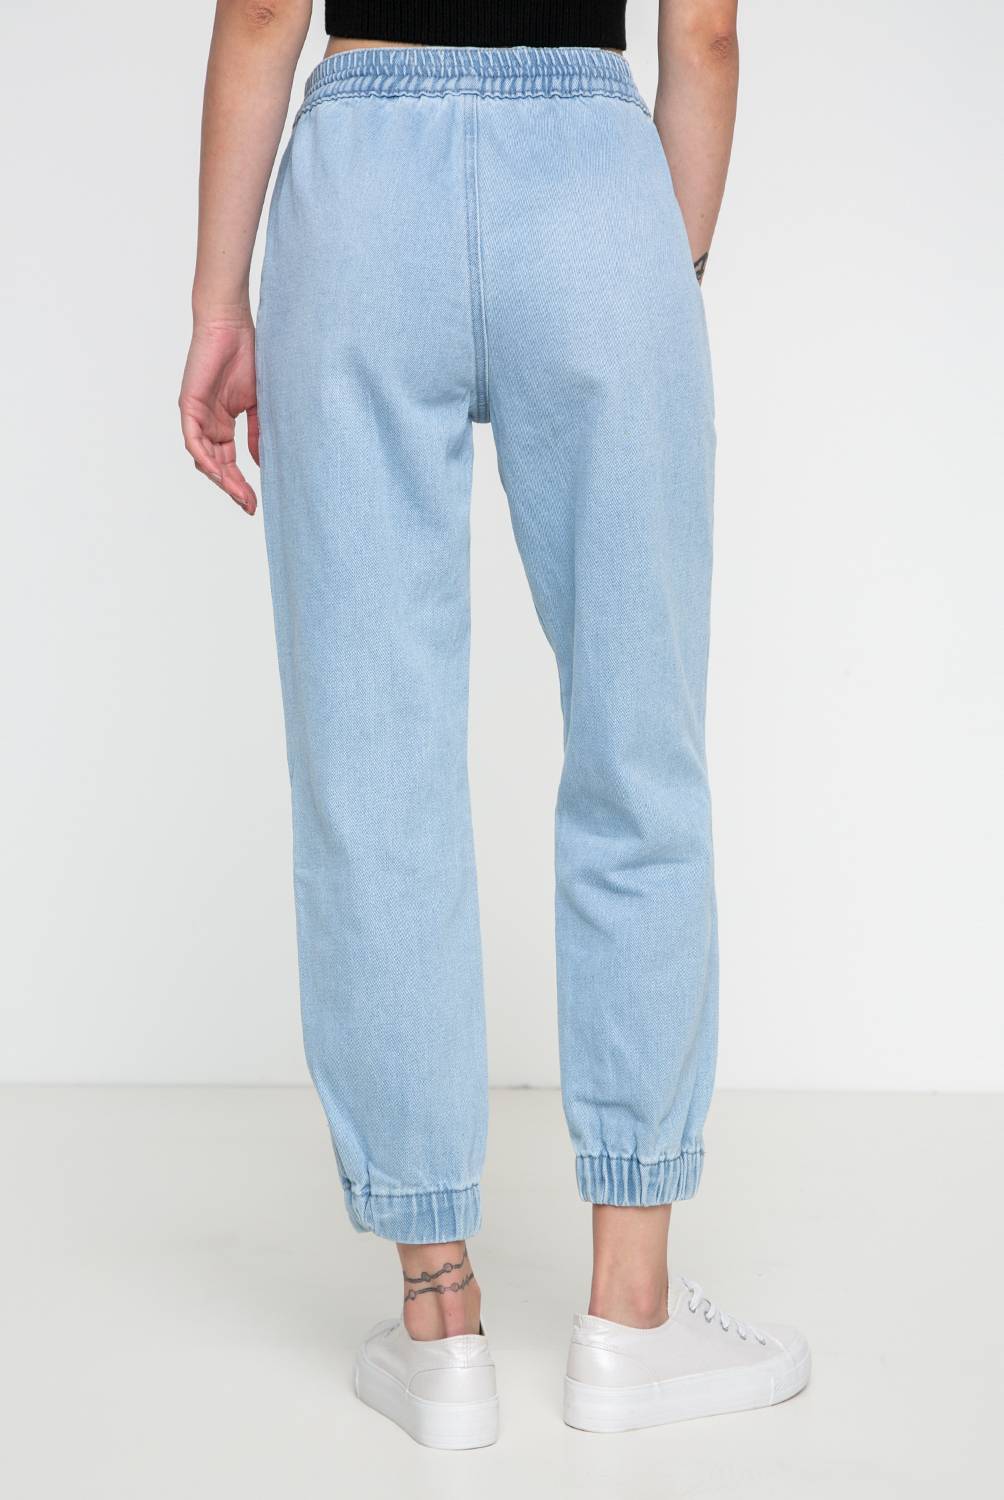 Doo Australia - Jeans Jogger Fit Mujer